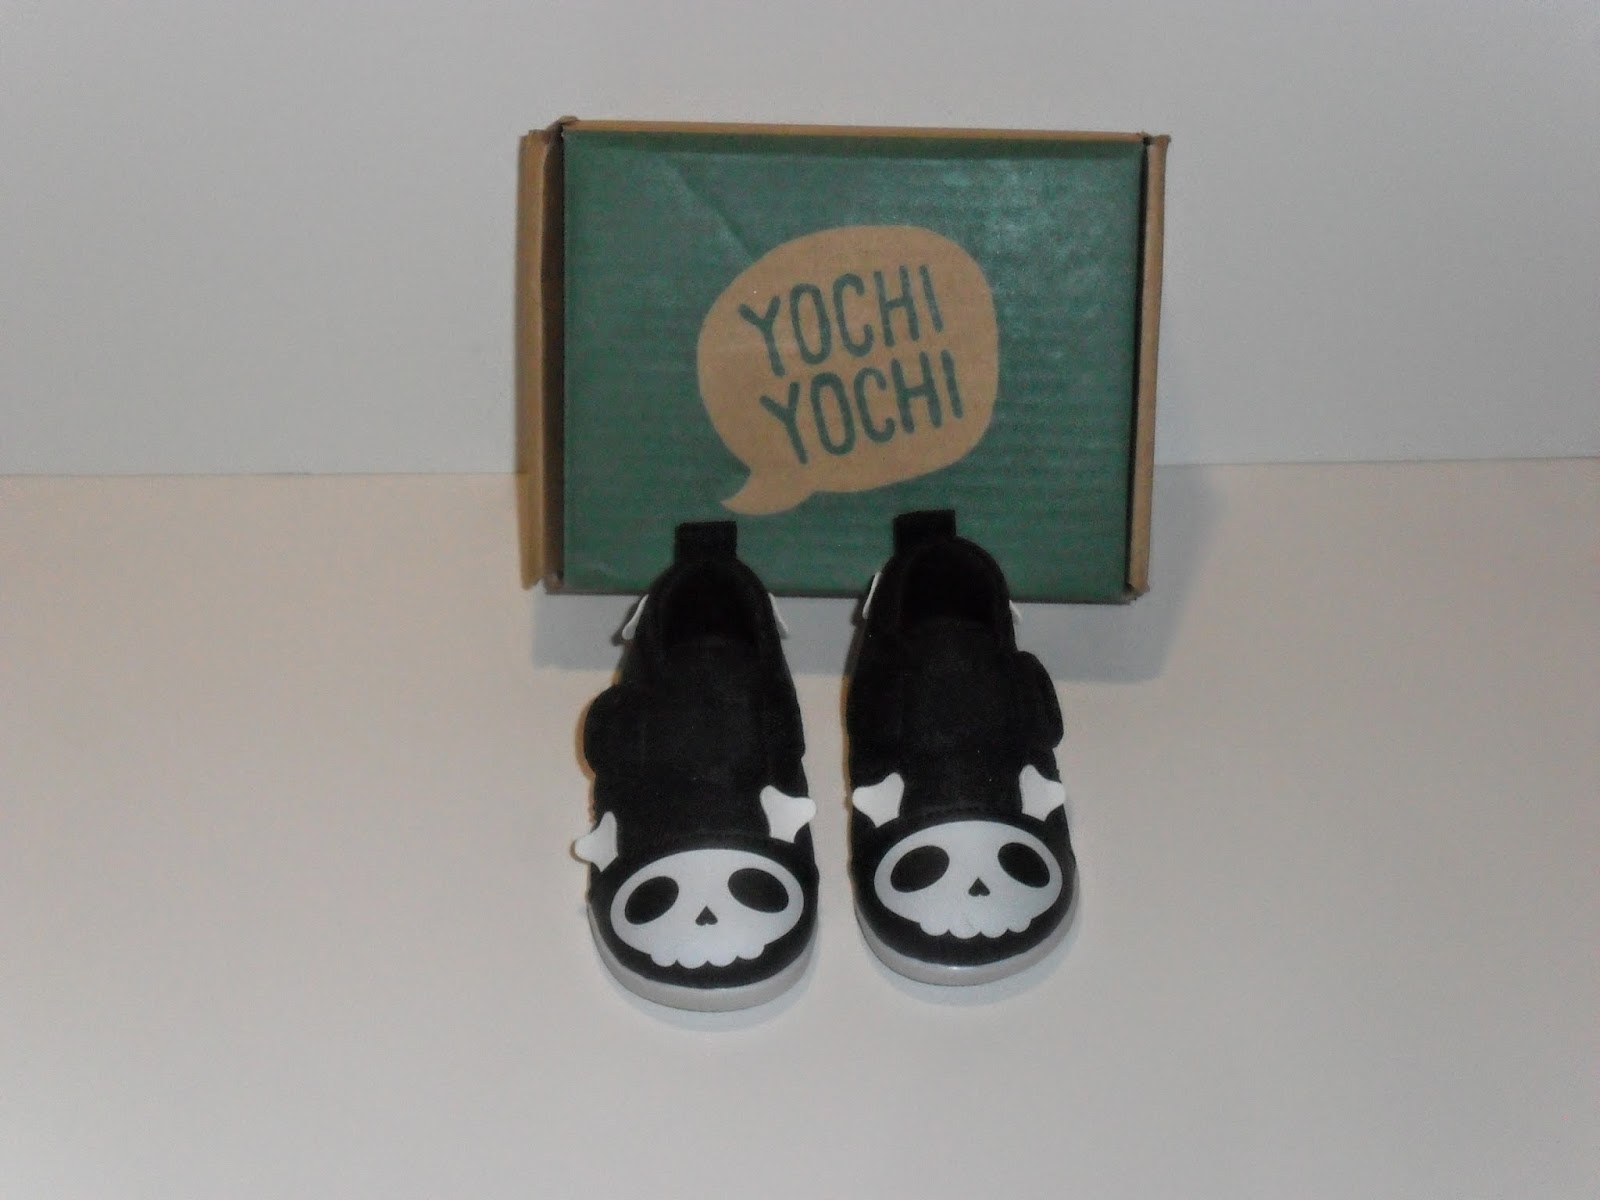 Yochi- Yochi The squeaky fun footwear. Review (Blu me away or Pink of me Event)